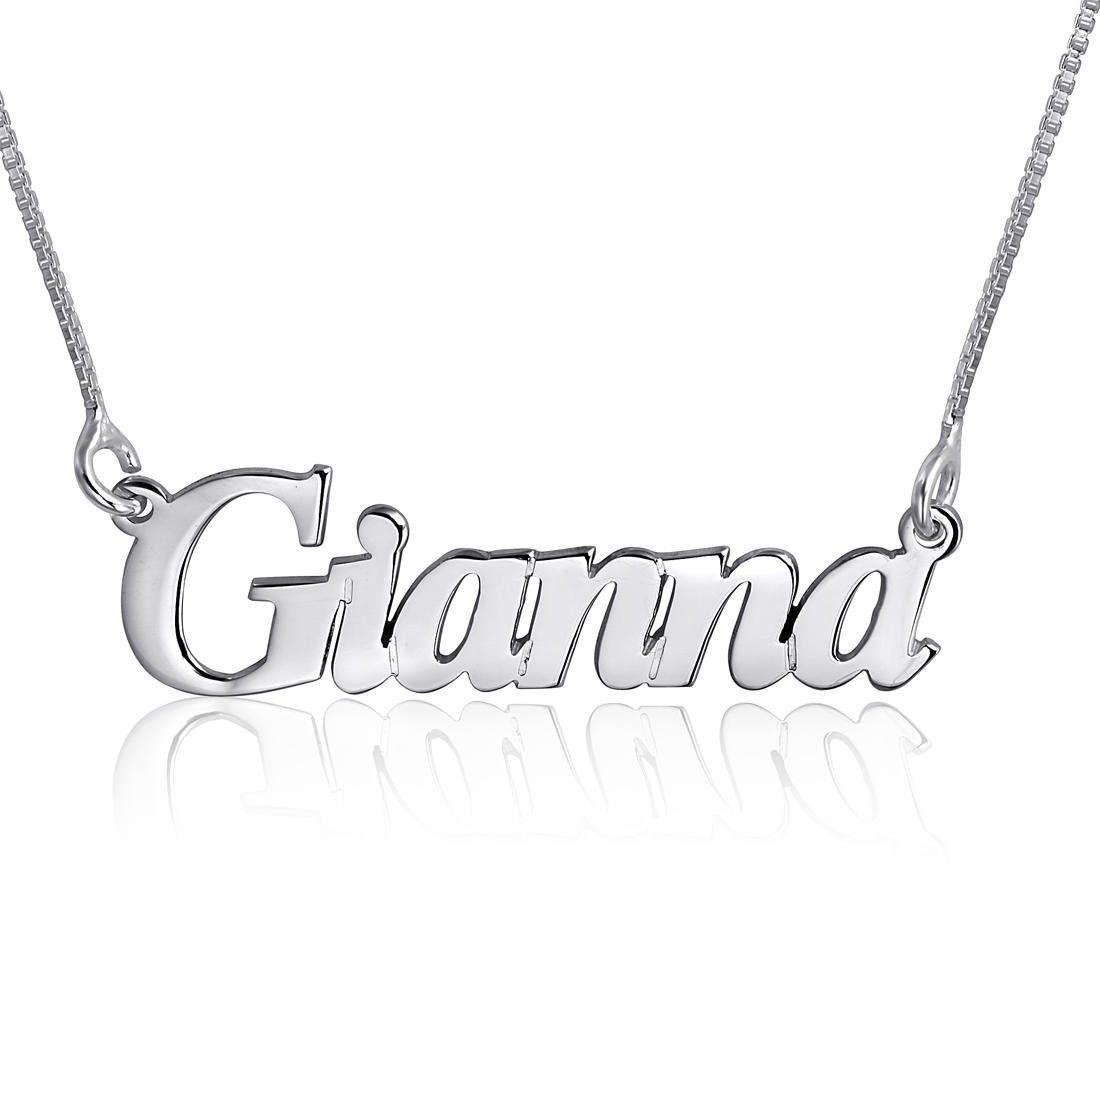 Gianna, Handwriting Style, Sterling Silver - 1